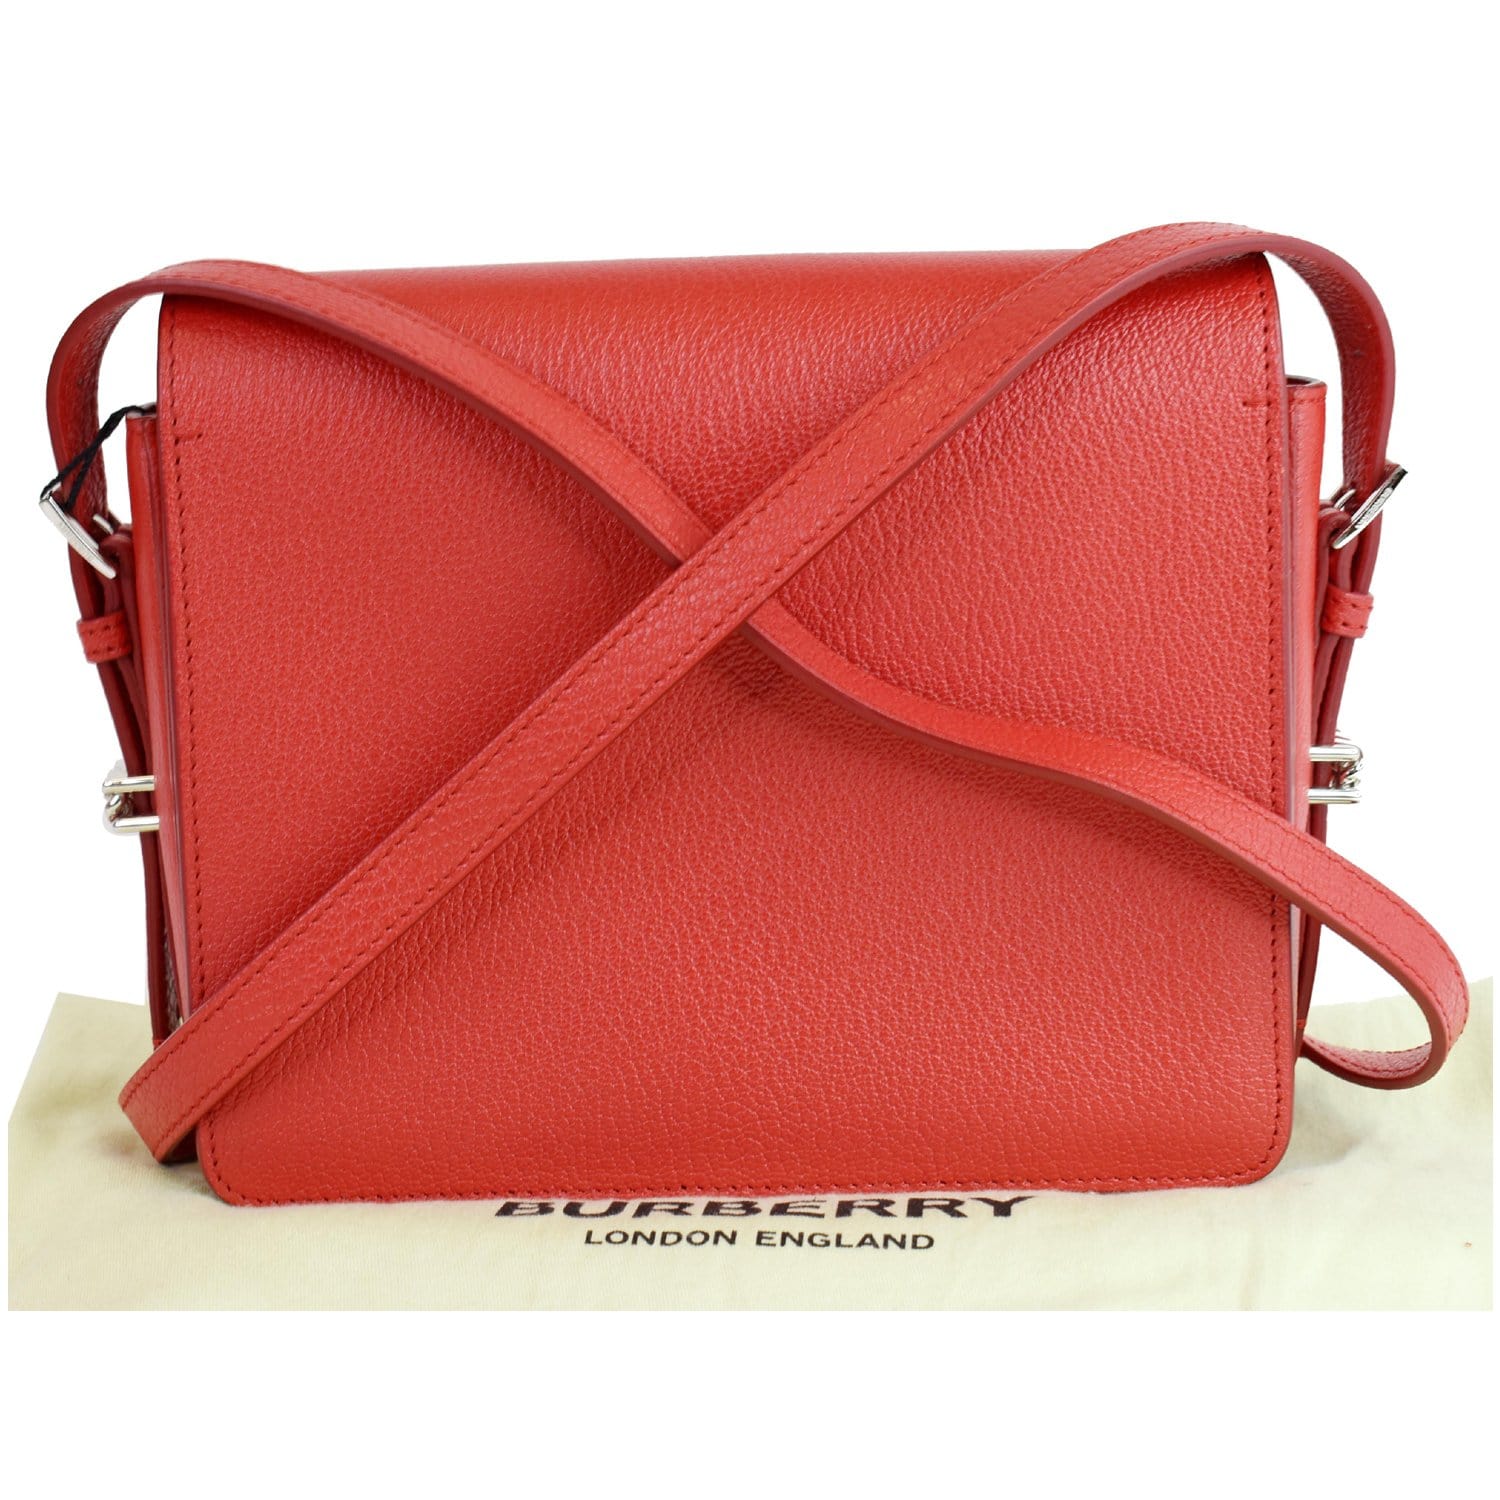 Burberry Small Camera Bag in Red Embossed Smooth Leather Crossbody $1290